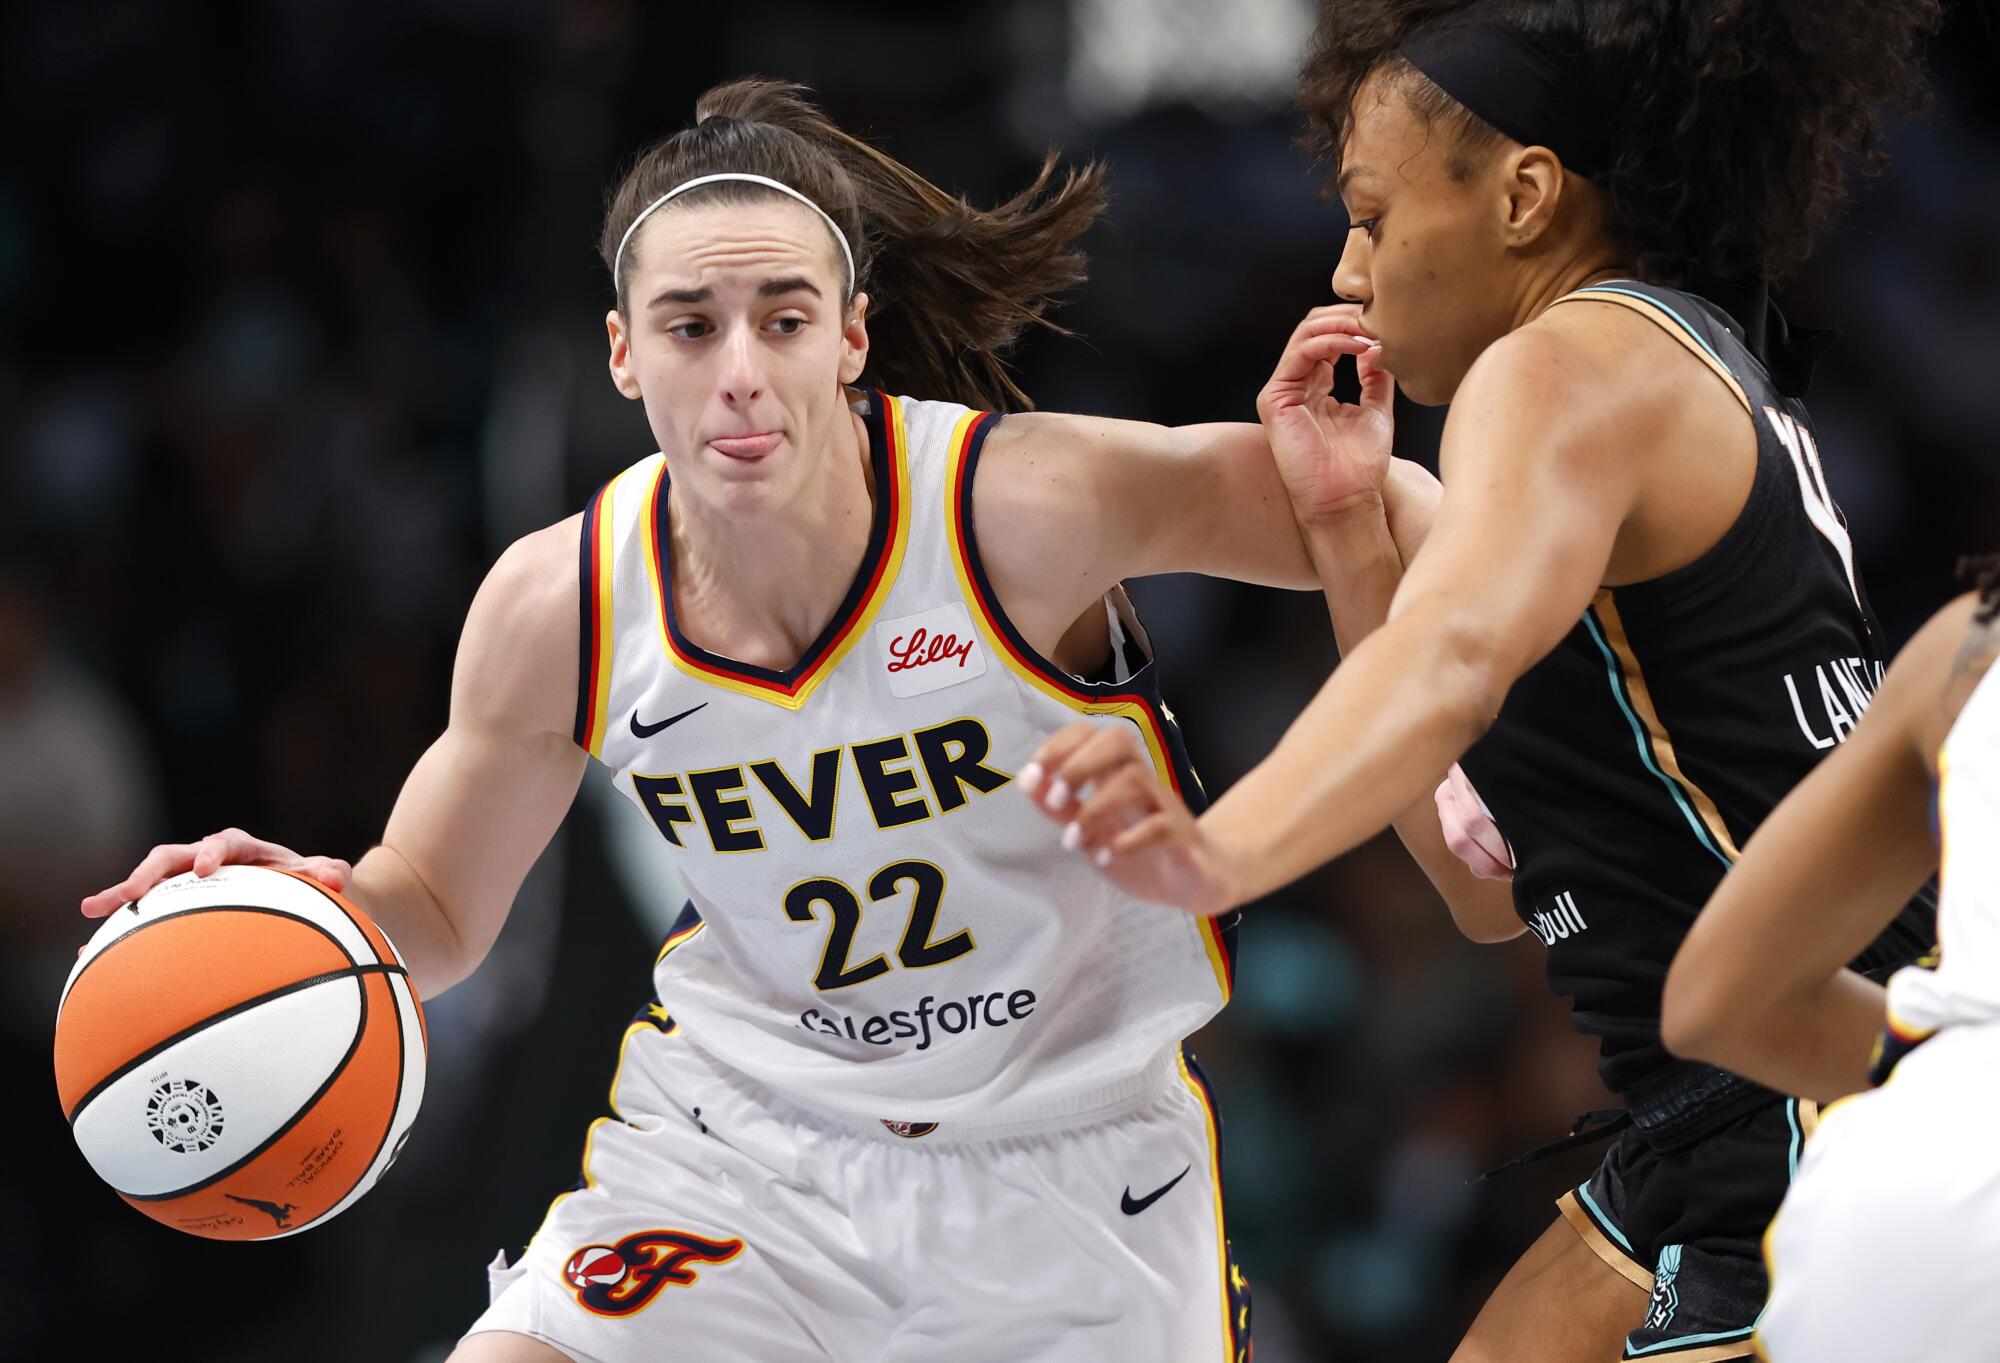 Indiana Fever guard Caitlin Clark drives to the basket under pressure from New York Liberty forward Betnijah Laney-Hamilton 